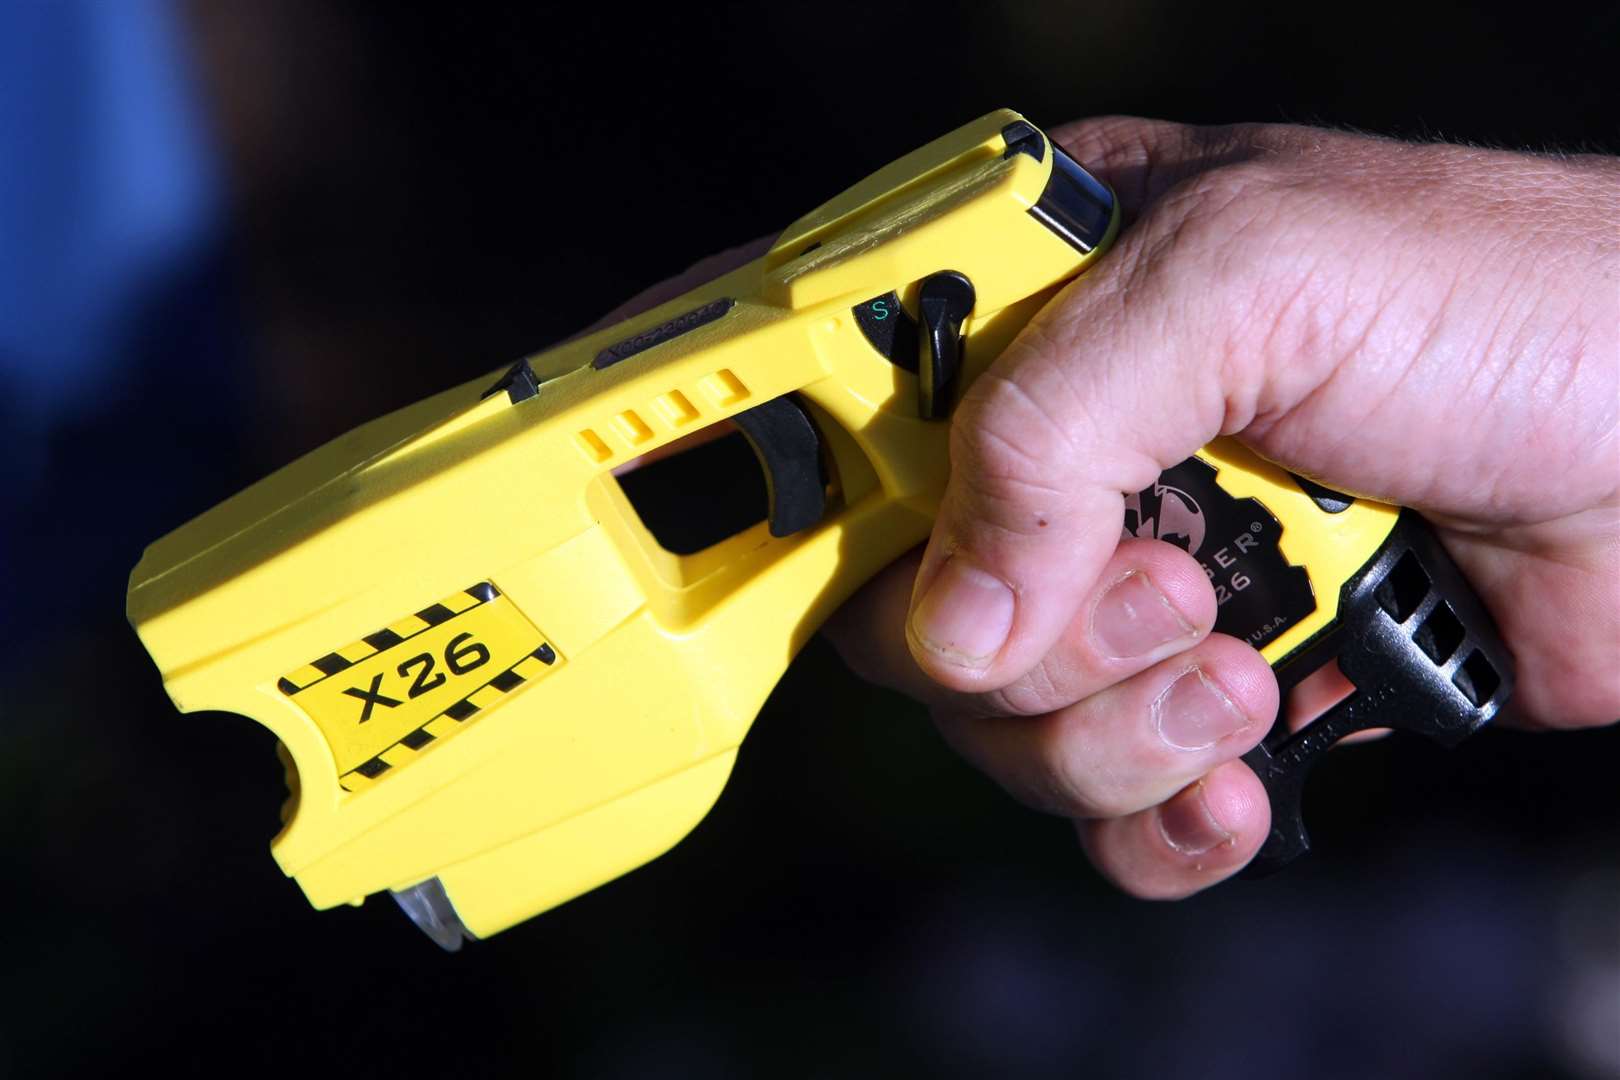 Police "pointed their taser" at the female, who then dropped the knife. Stock picture